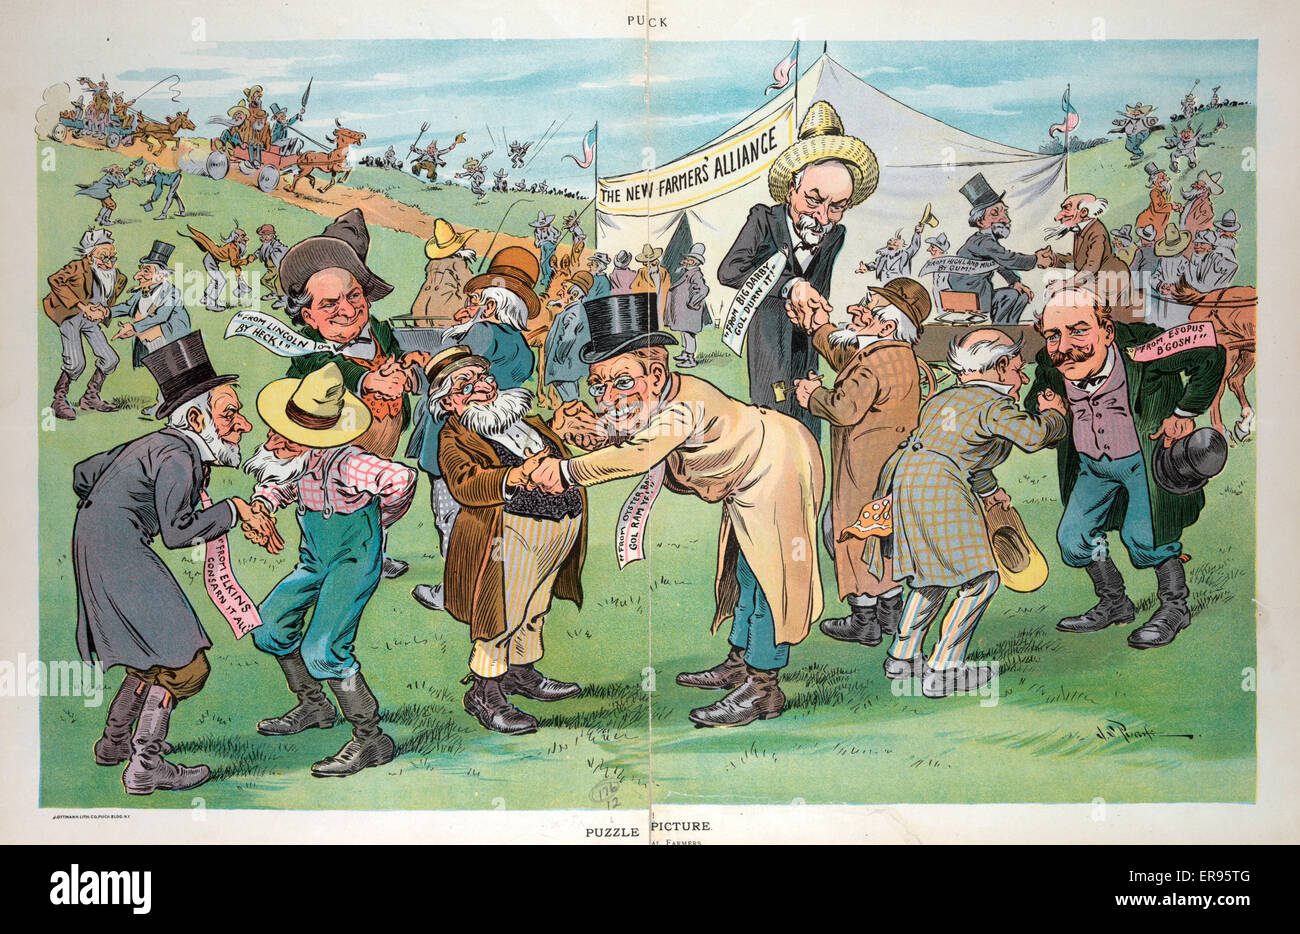 Puzzle picture. Illustration shows politicians Henry Gassaway Davis, William Jennings Bryan, Theodore Roosevelt, Charles W. Fairbanks, Thomas C. Platt, and Alton B. Parker shaking hands with farmers outside a tent labeled The New Farmers' Alliance. Date 1 Stock Photo